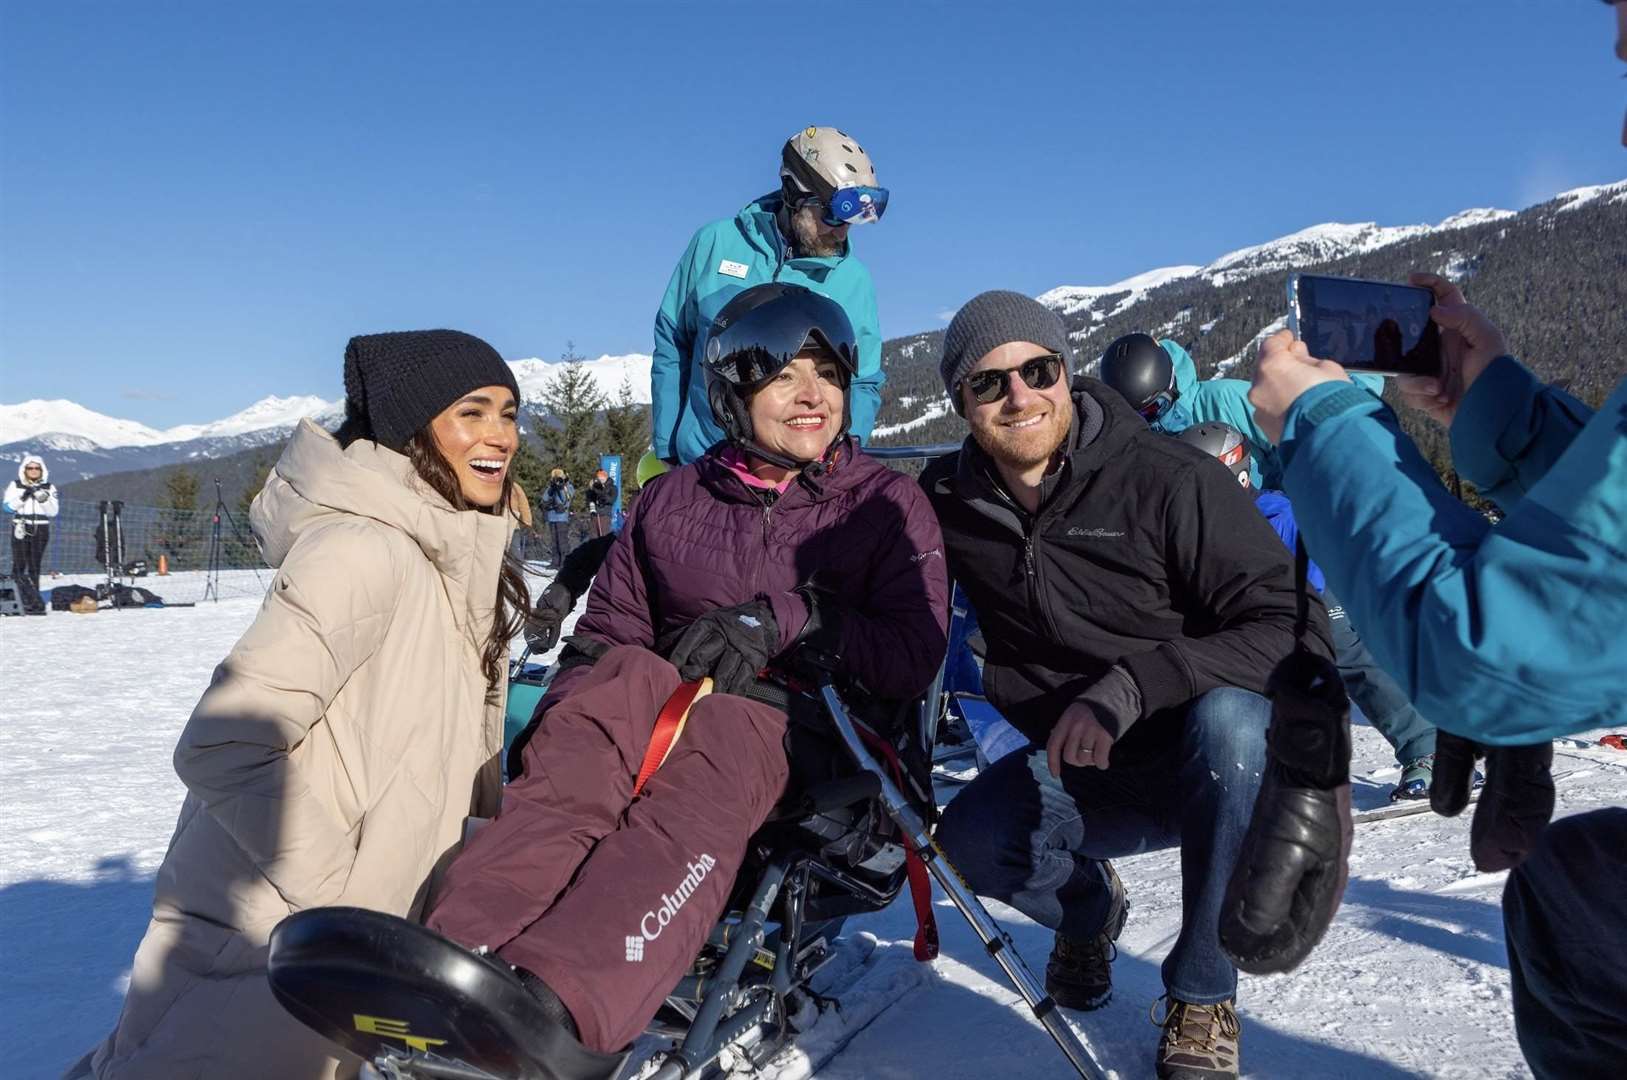 The Duke and Duchess of Sussex with participant Rosa Sanchez Bermudez during their visit to Whistler (Jeremy Allen/Invictus Games)